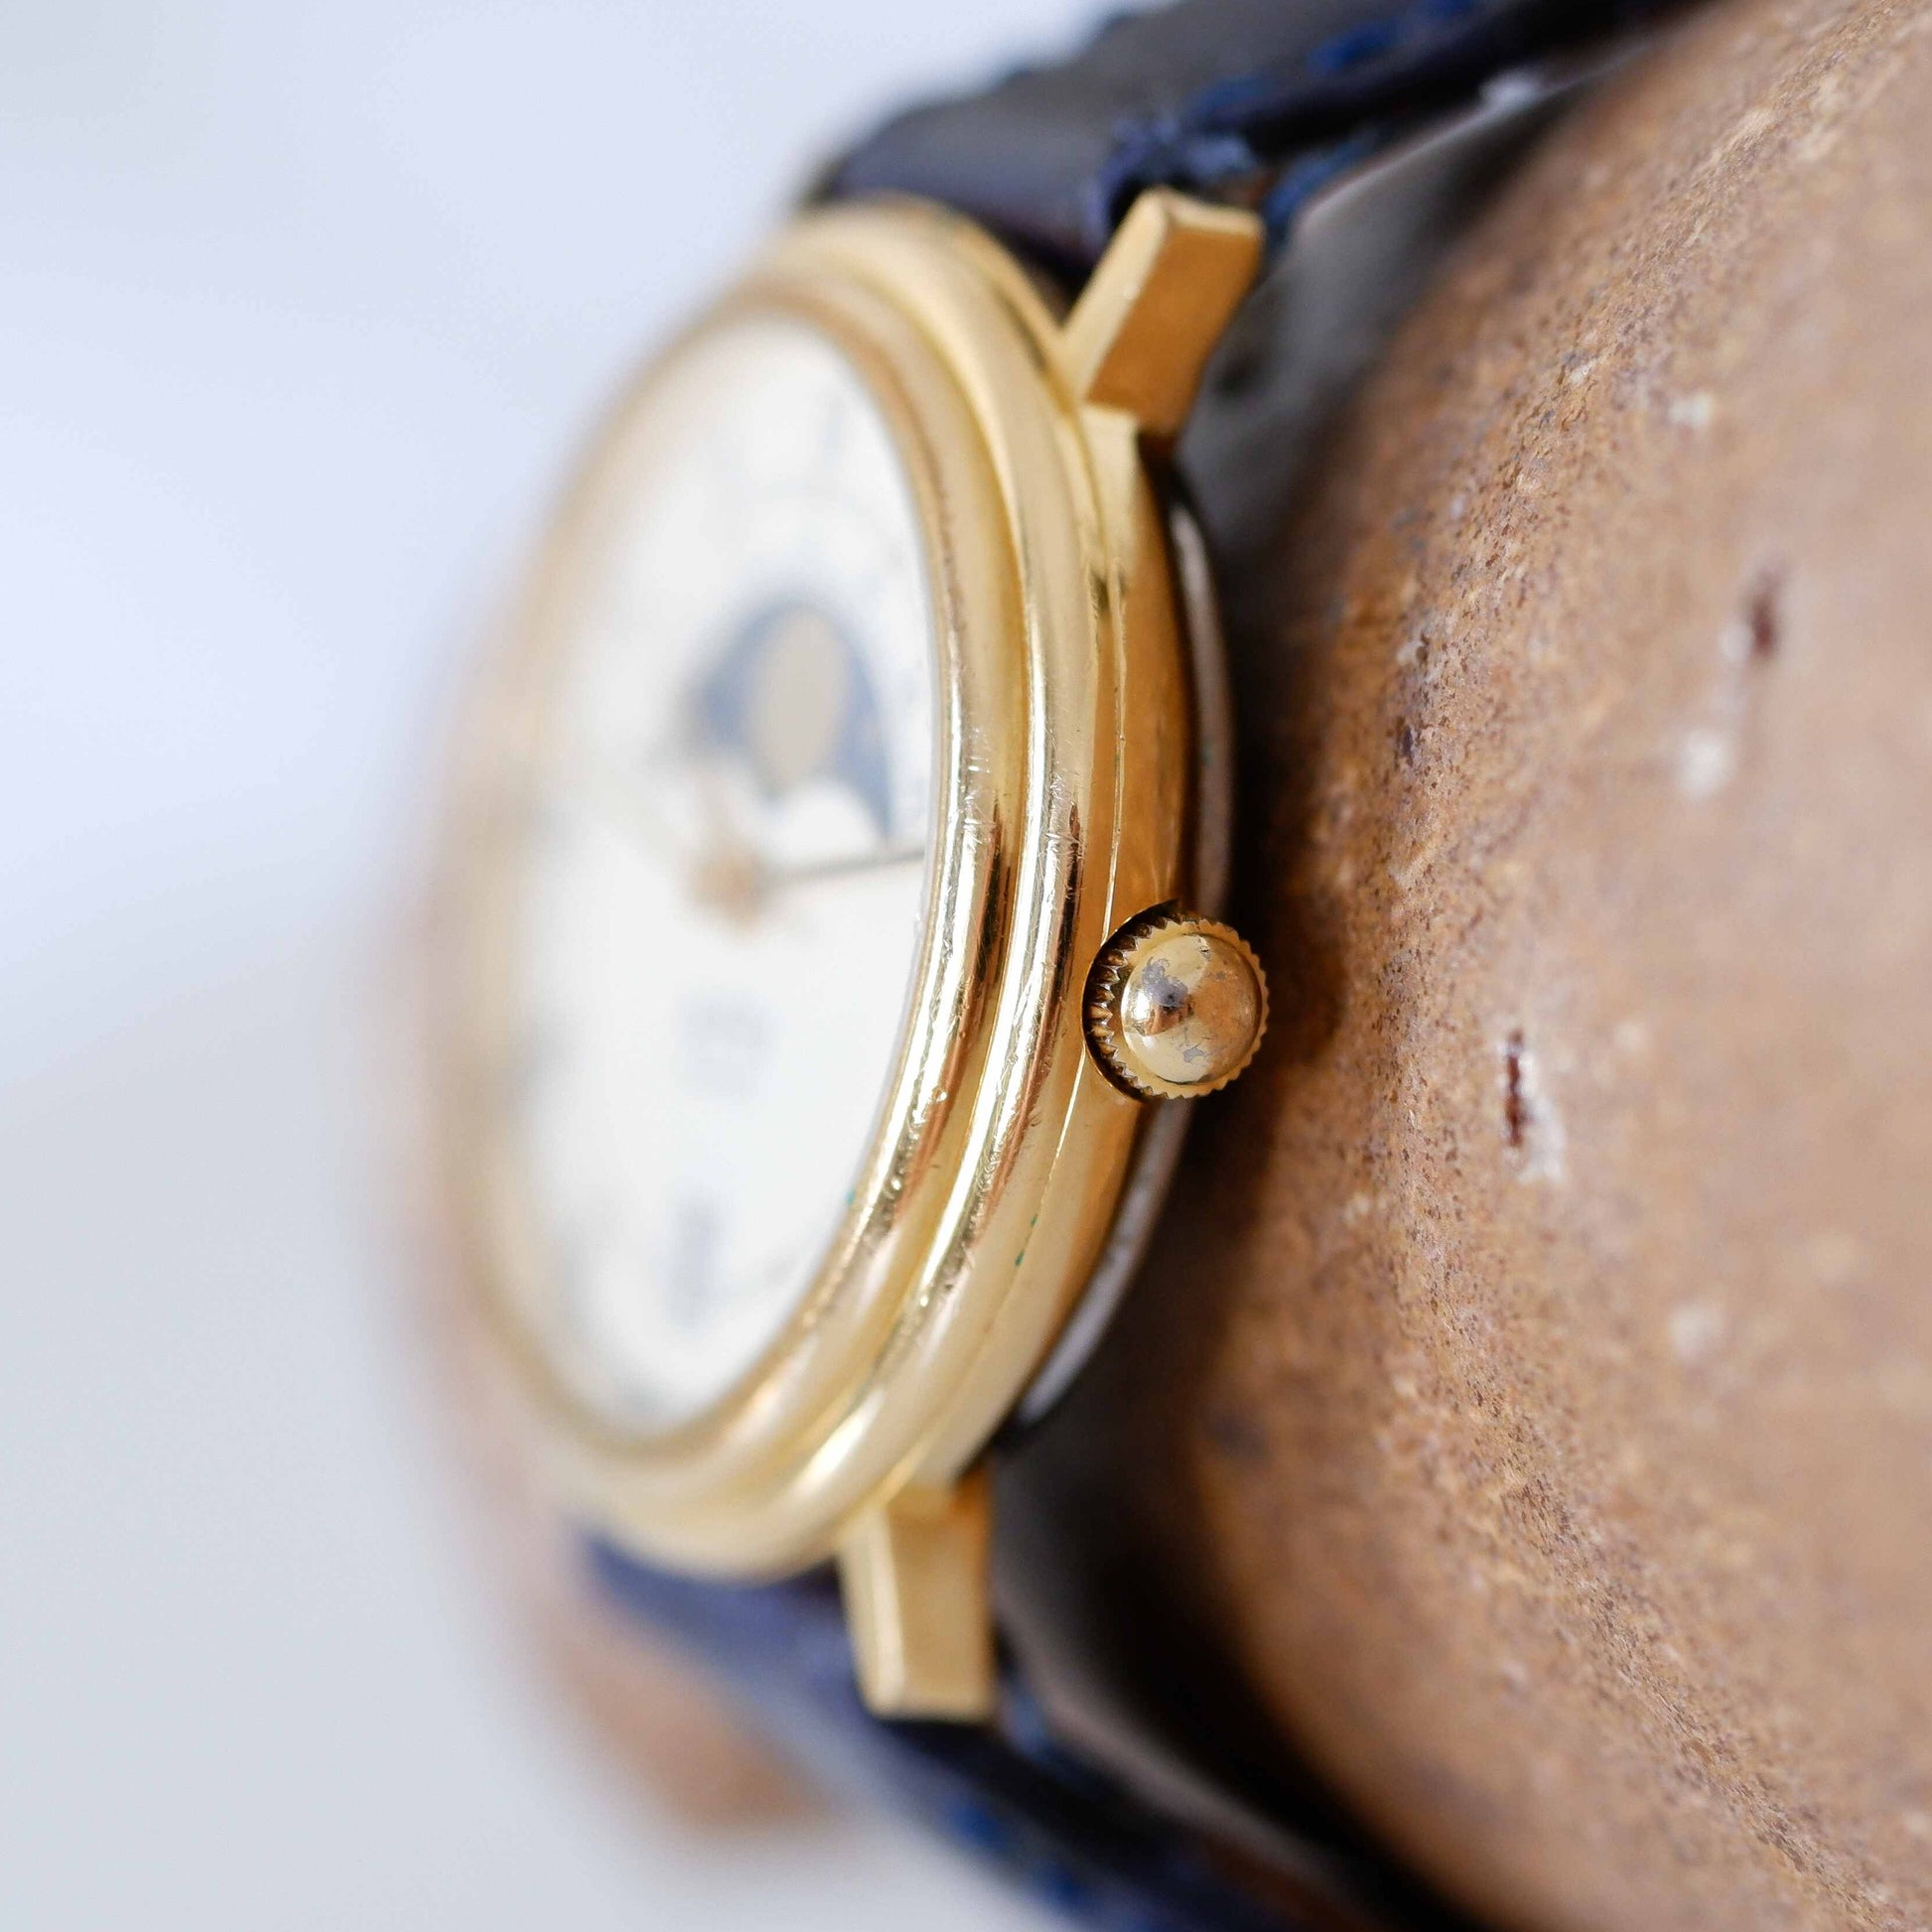 Copy of Alfex Vintage Ladies Watch: 80s Gold, Rectangular Moon Phase Style | Side View Right